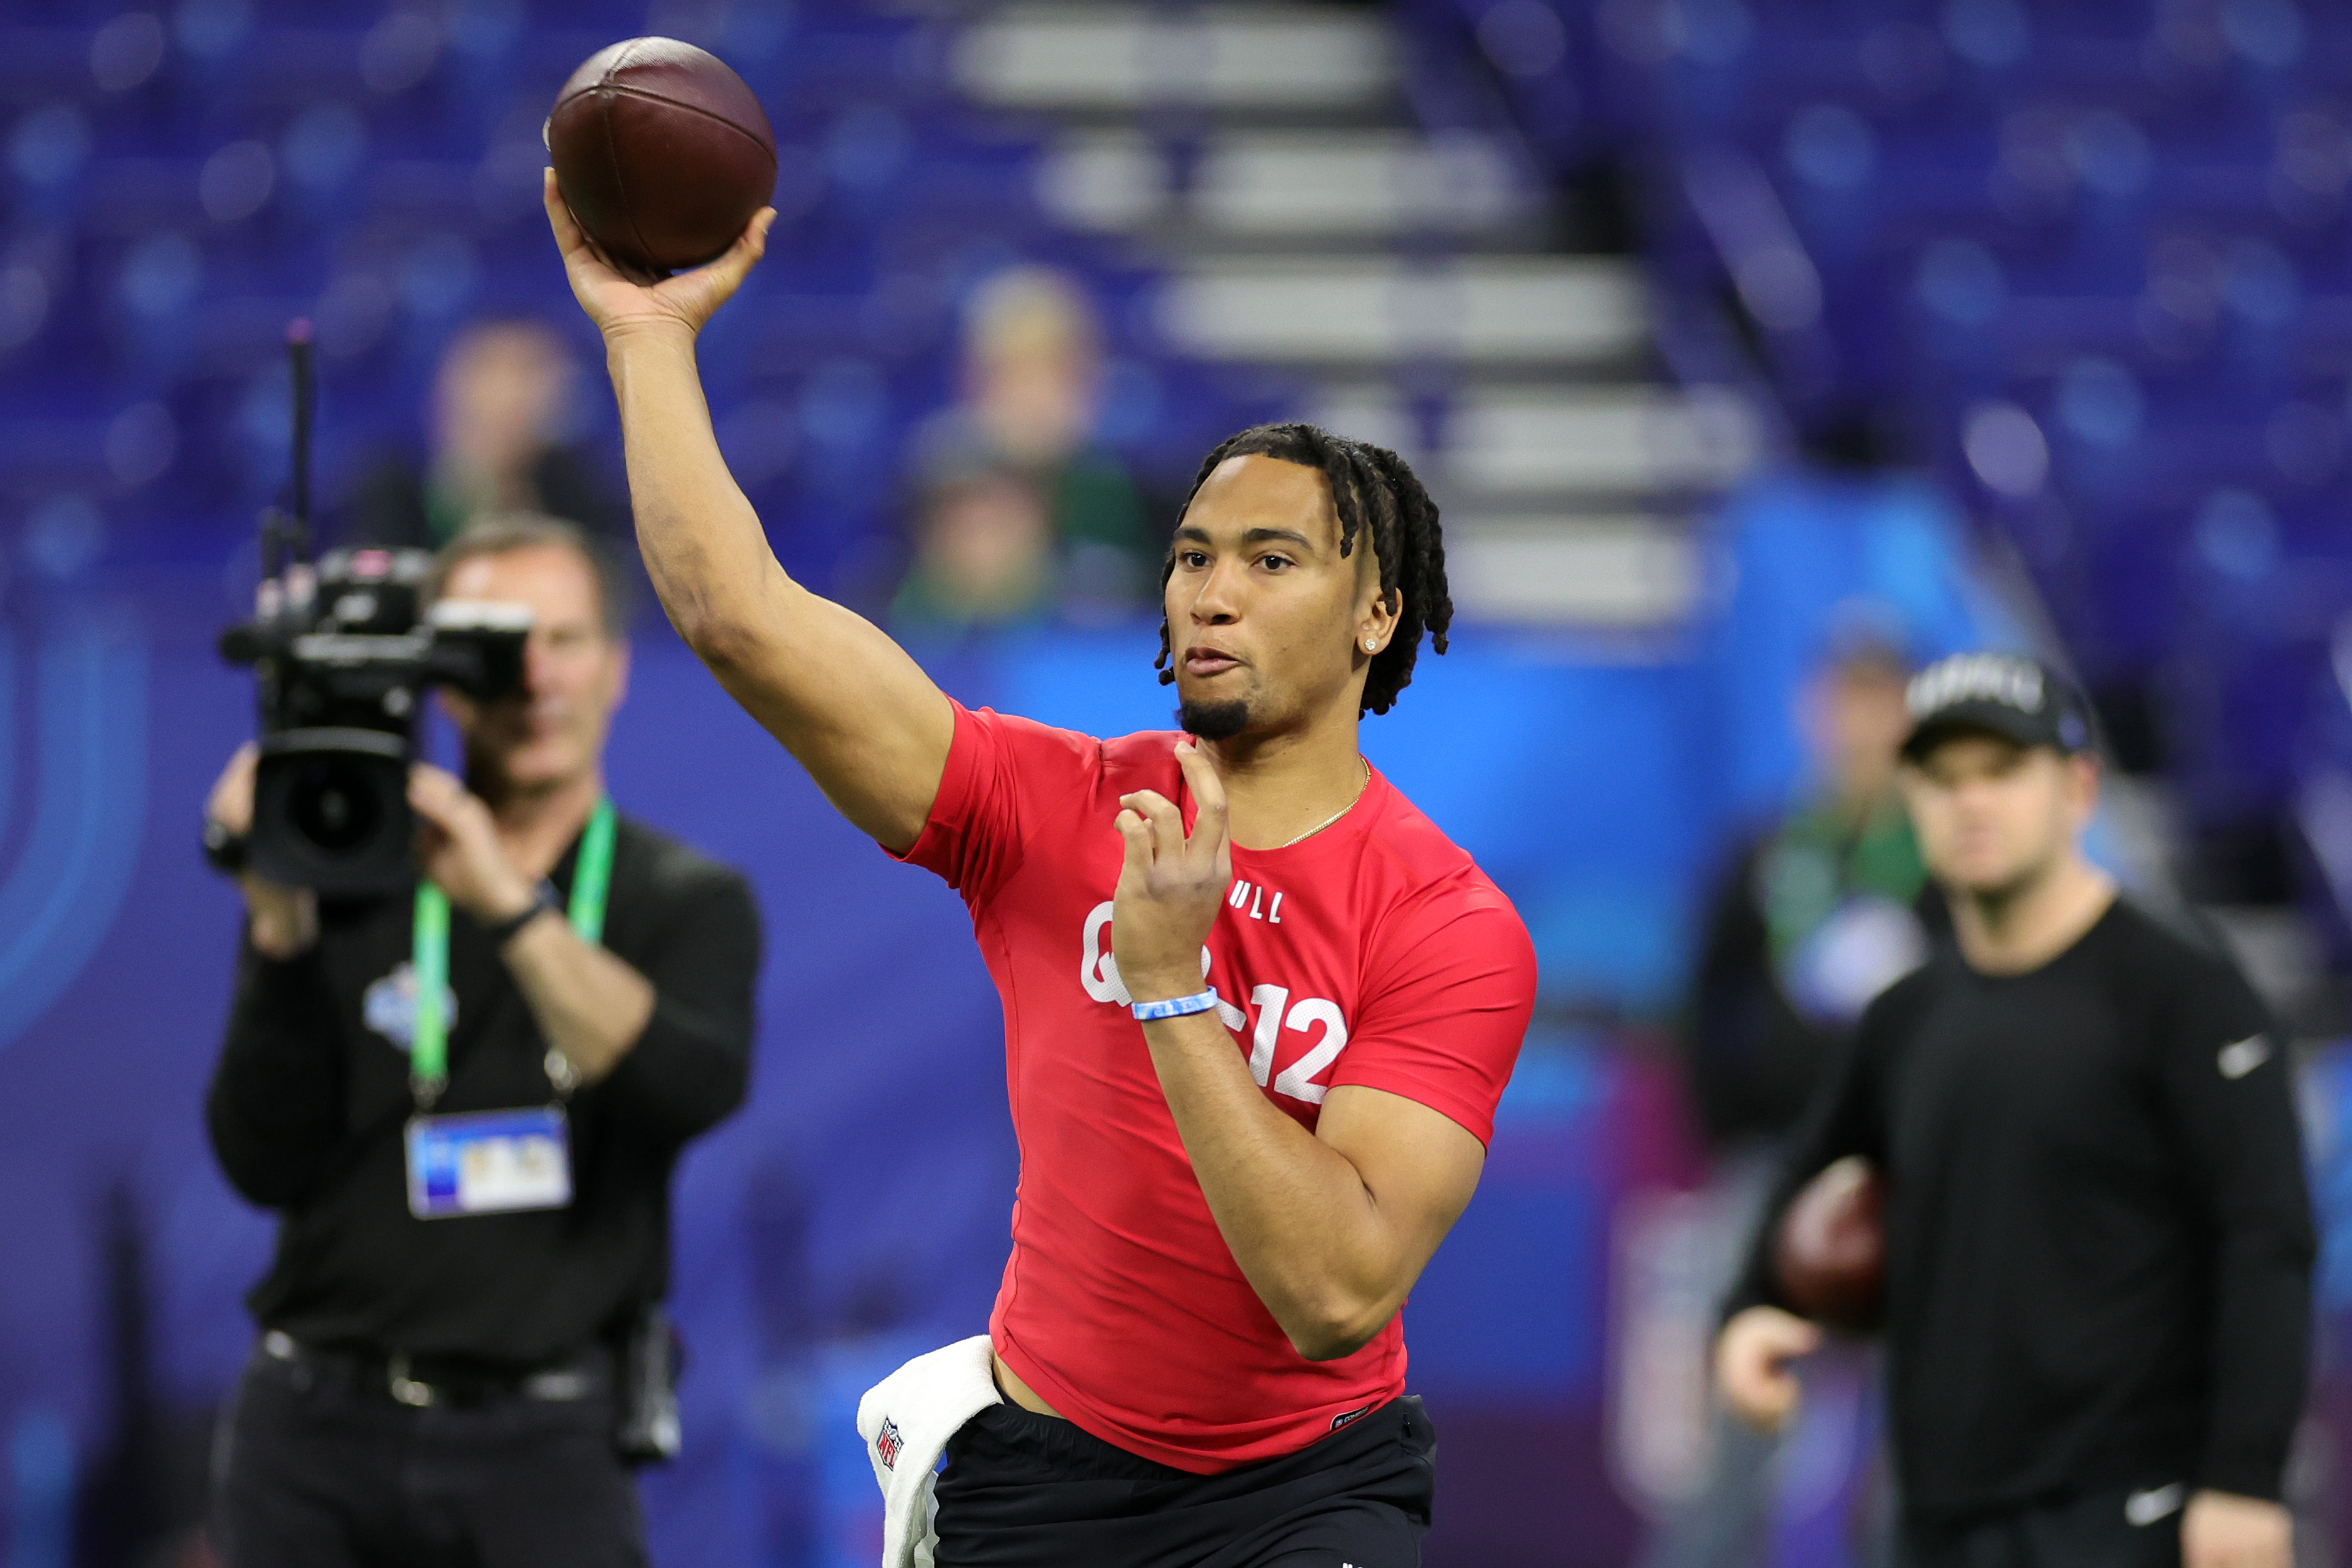 Quarterback C.J. Stroud of Ohio State University works at the NFL Combine at Lucas Oil Stadium in Indianapolis, Indiana, March 4, 2023. /CFP